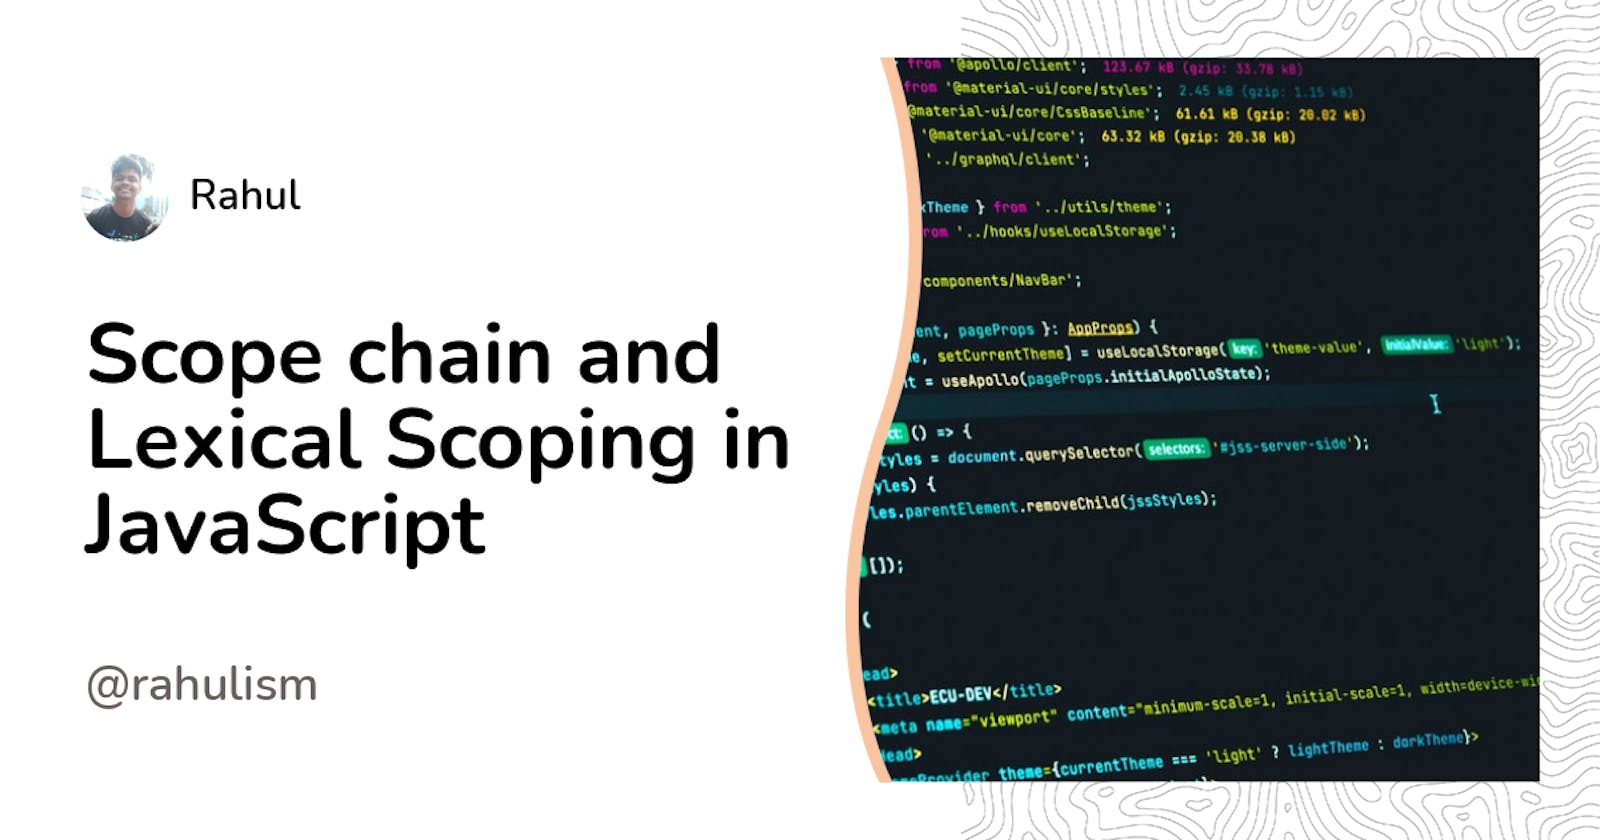 Scope chain and Lexical Scoping in JavaScript